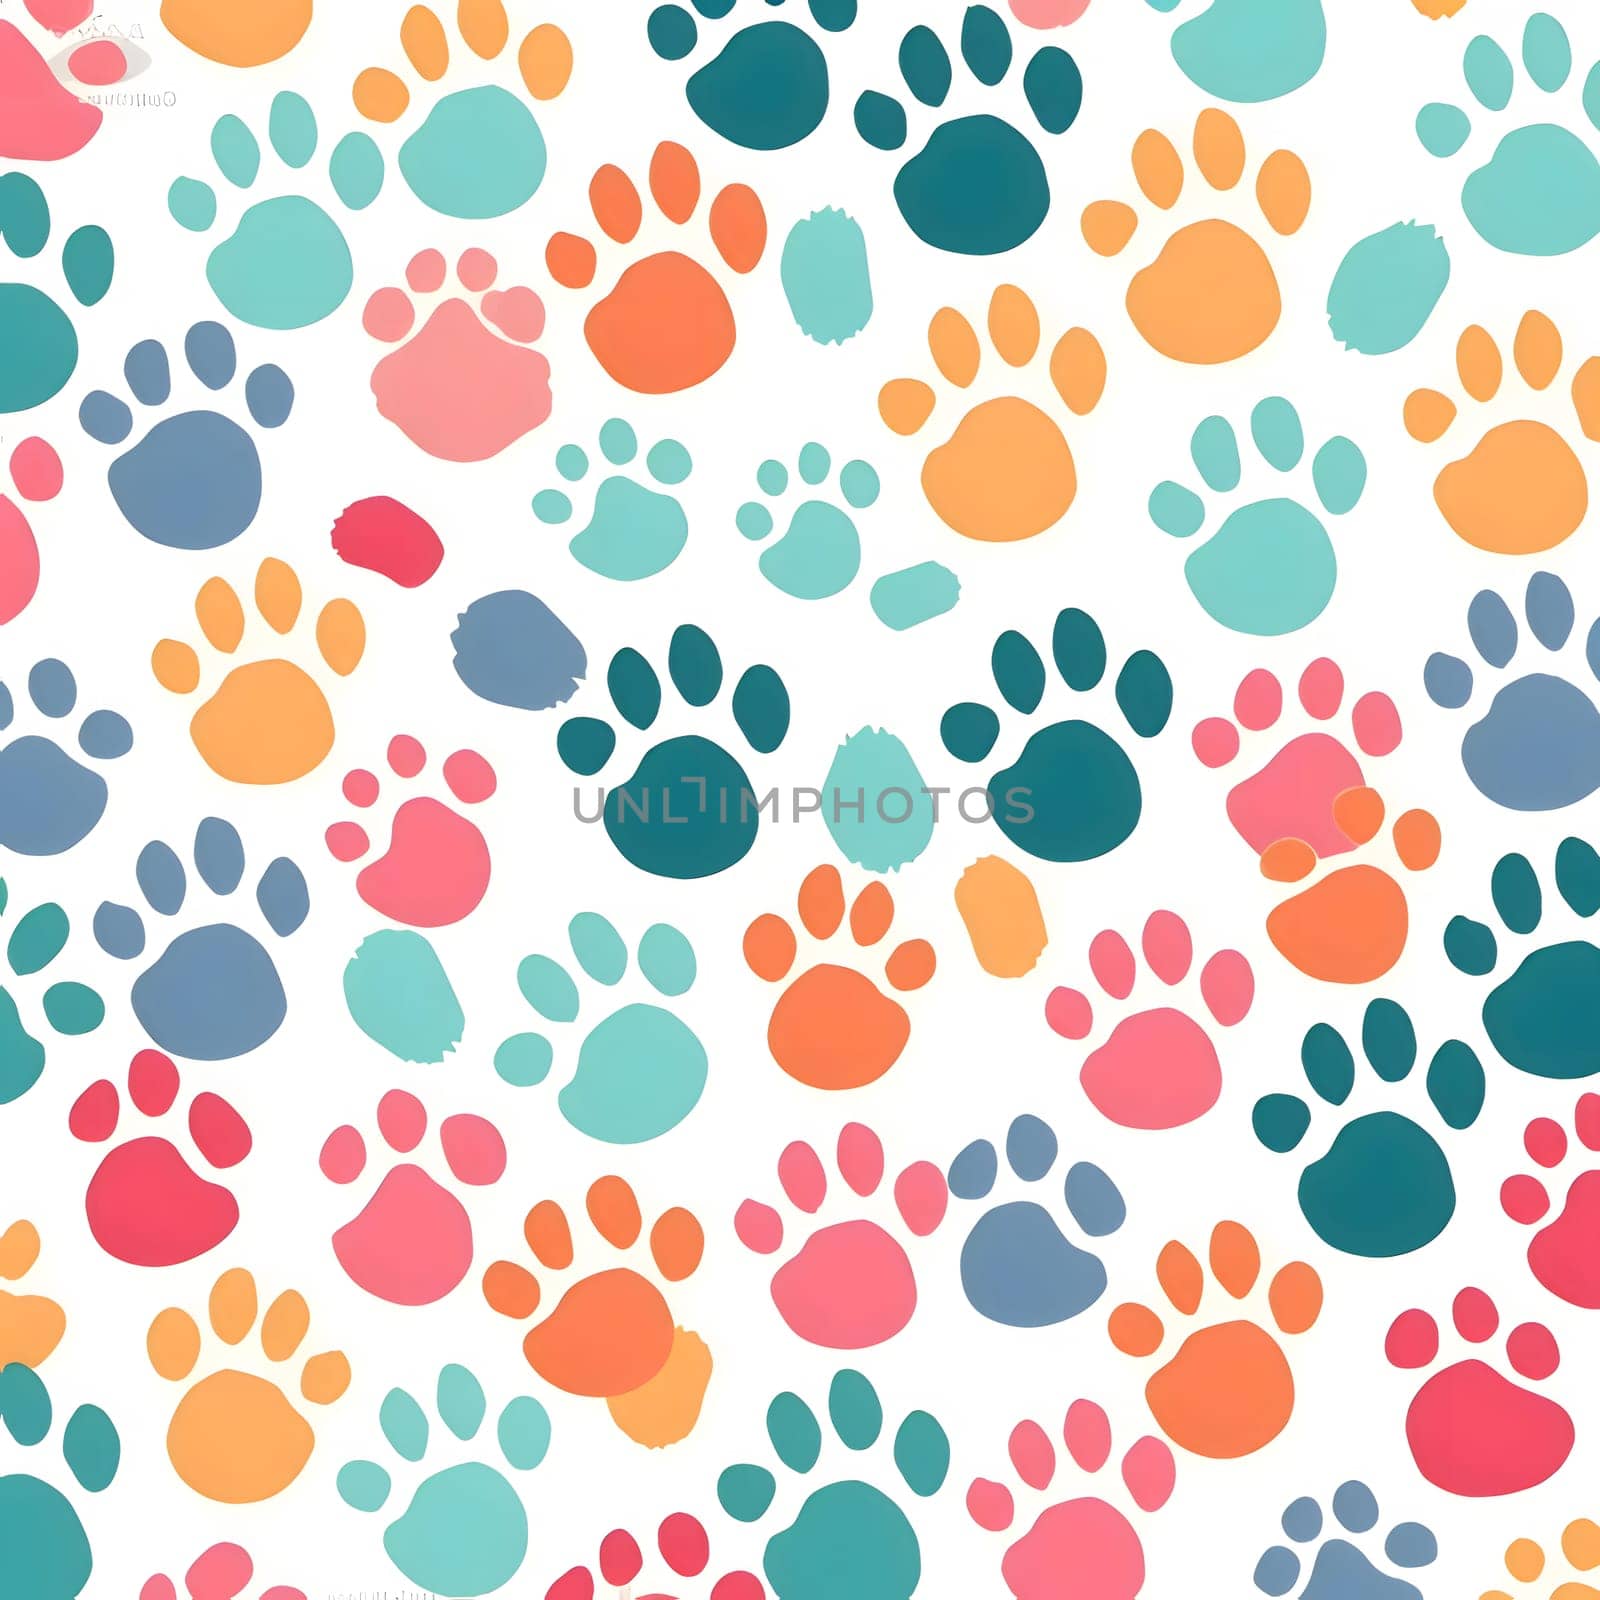 Patterns and banners backgrounds: Seamless pattern with colorful paw prints. Vector illustration for your design